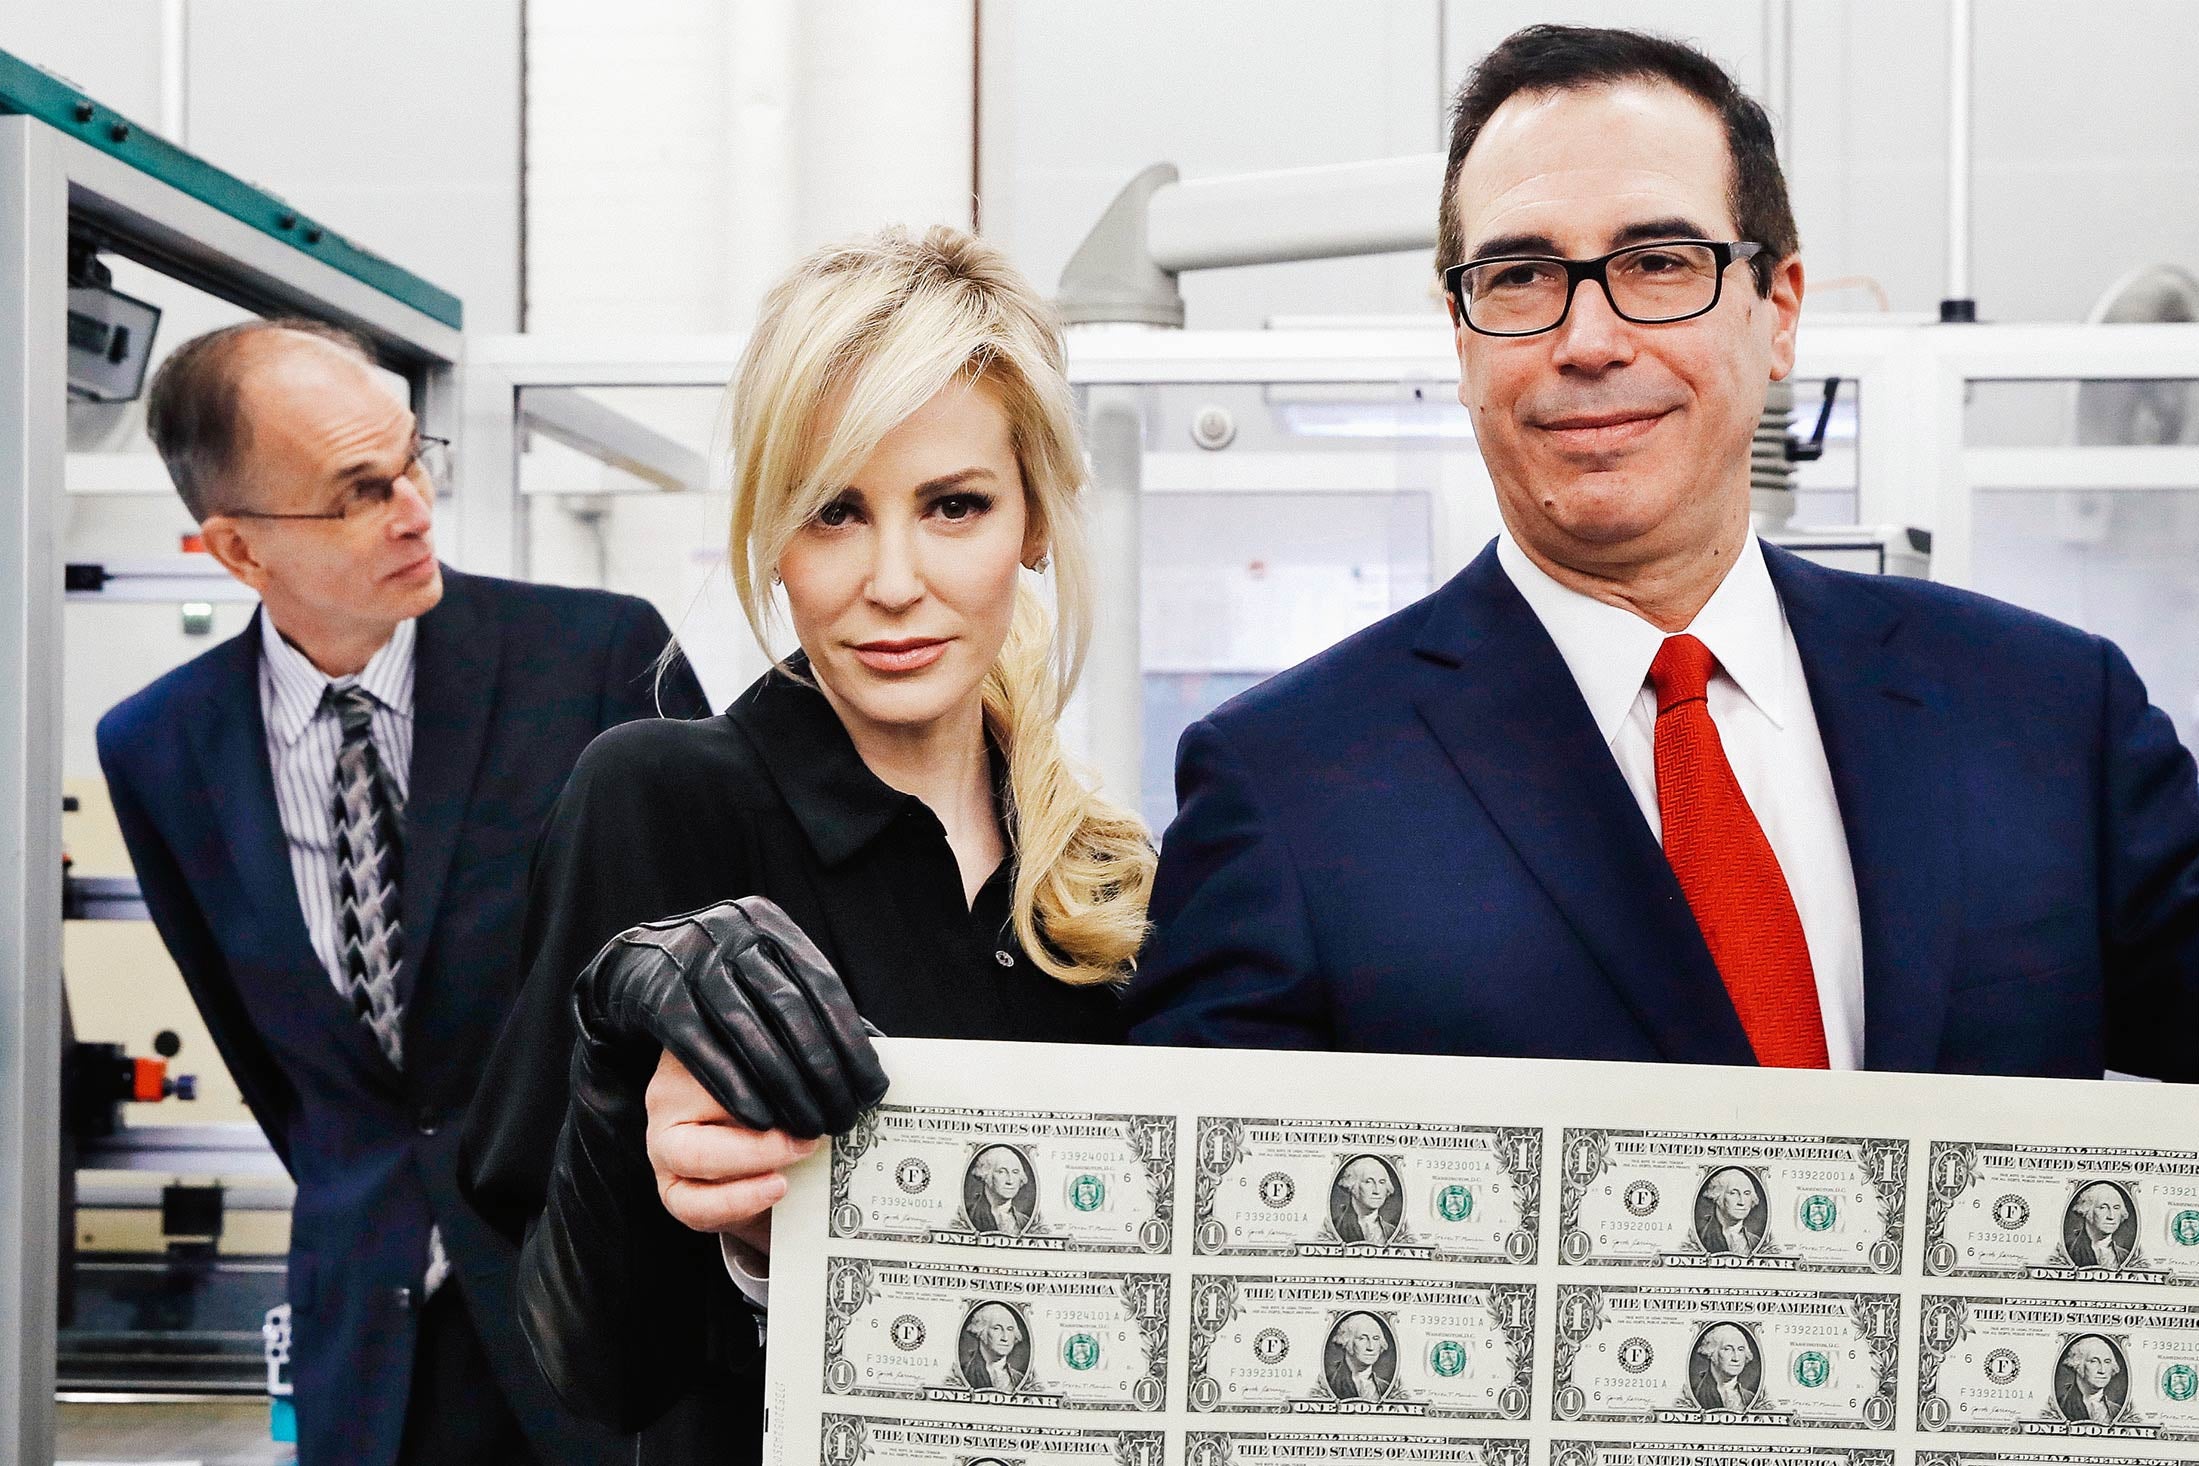 Treasury Secretary Steve Mnuchin and his wife Louise Linton holding up a sheet of new dollar bills at the Bureau of Engraving and Printing in Washington,  D.C. on Nov. 15, 2017.